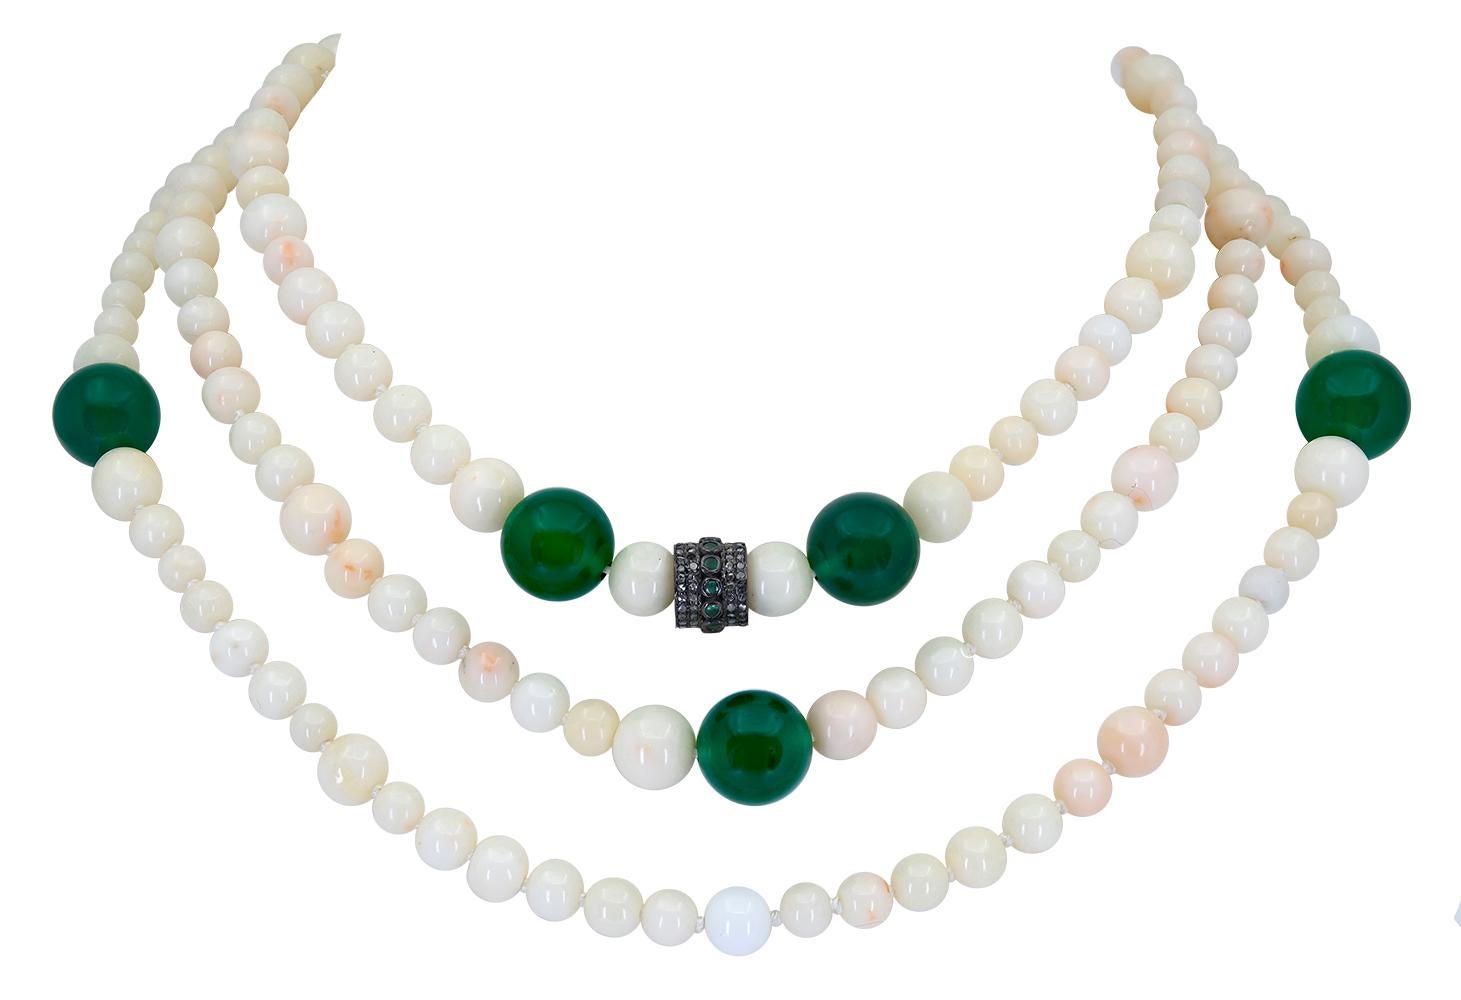 A 30 inch White Coral and Green Onyx Necklace that features 9 round translucent Green Onyx Beads that measure, as an average, 12.5 mm. These rich green onyx beads stand out in beautiful contrast from the round, natural white coral beads that